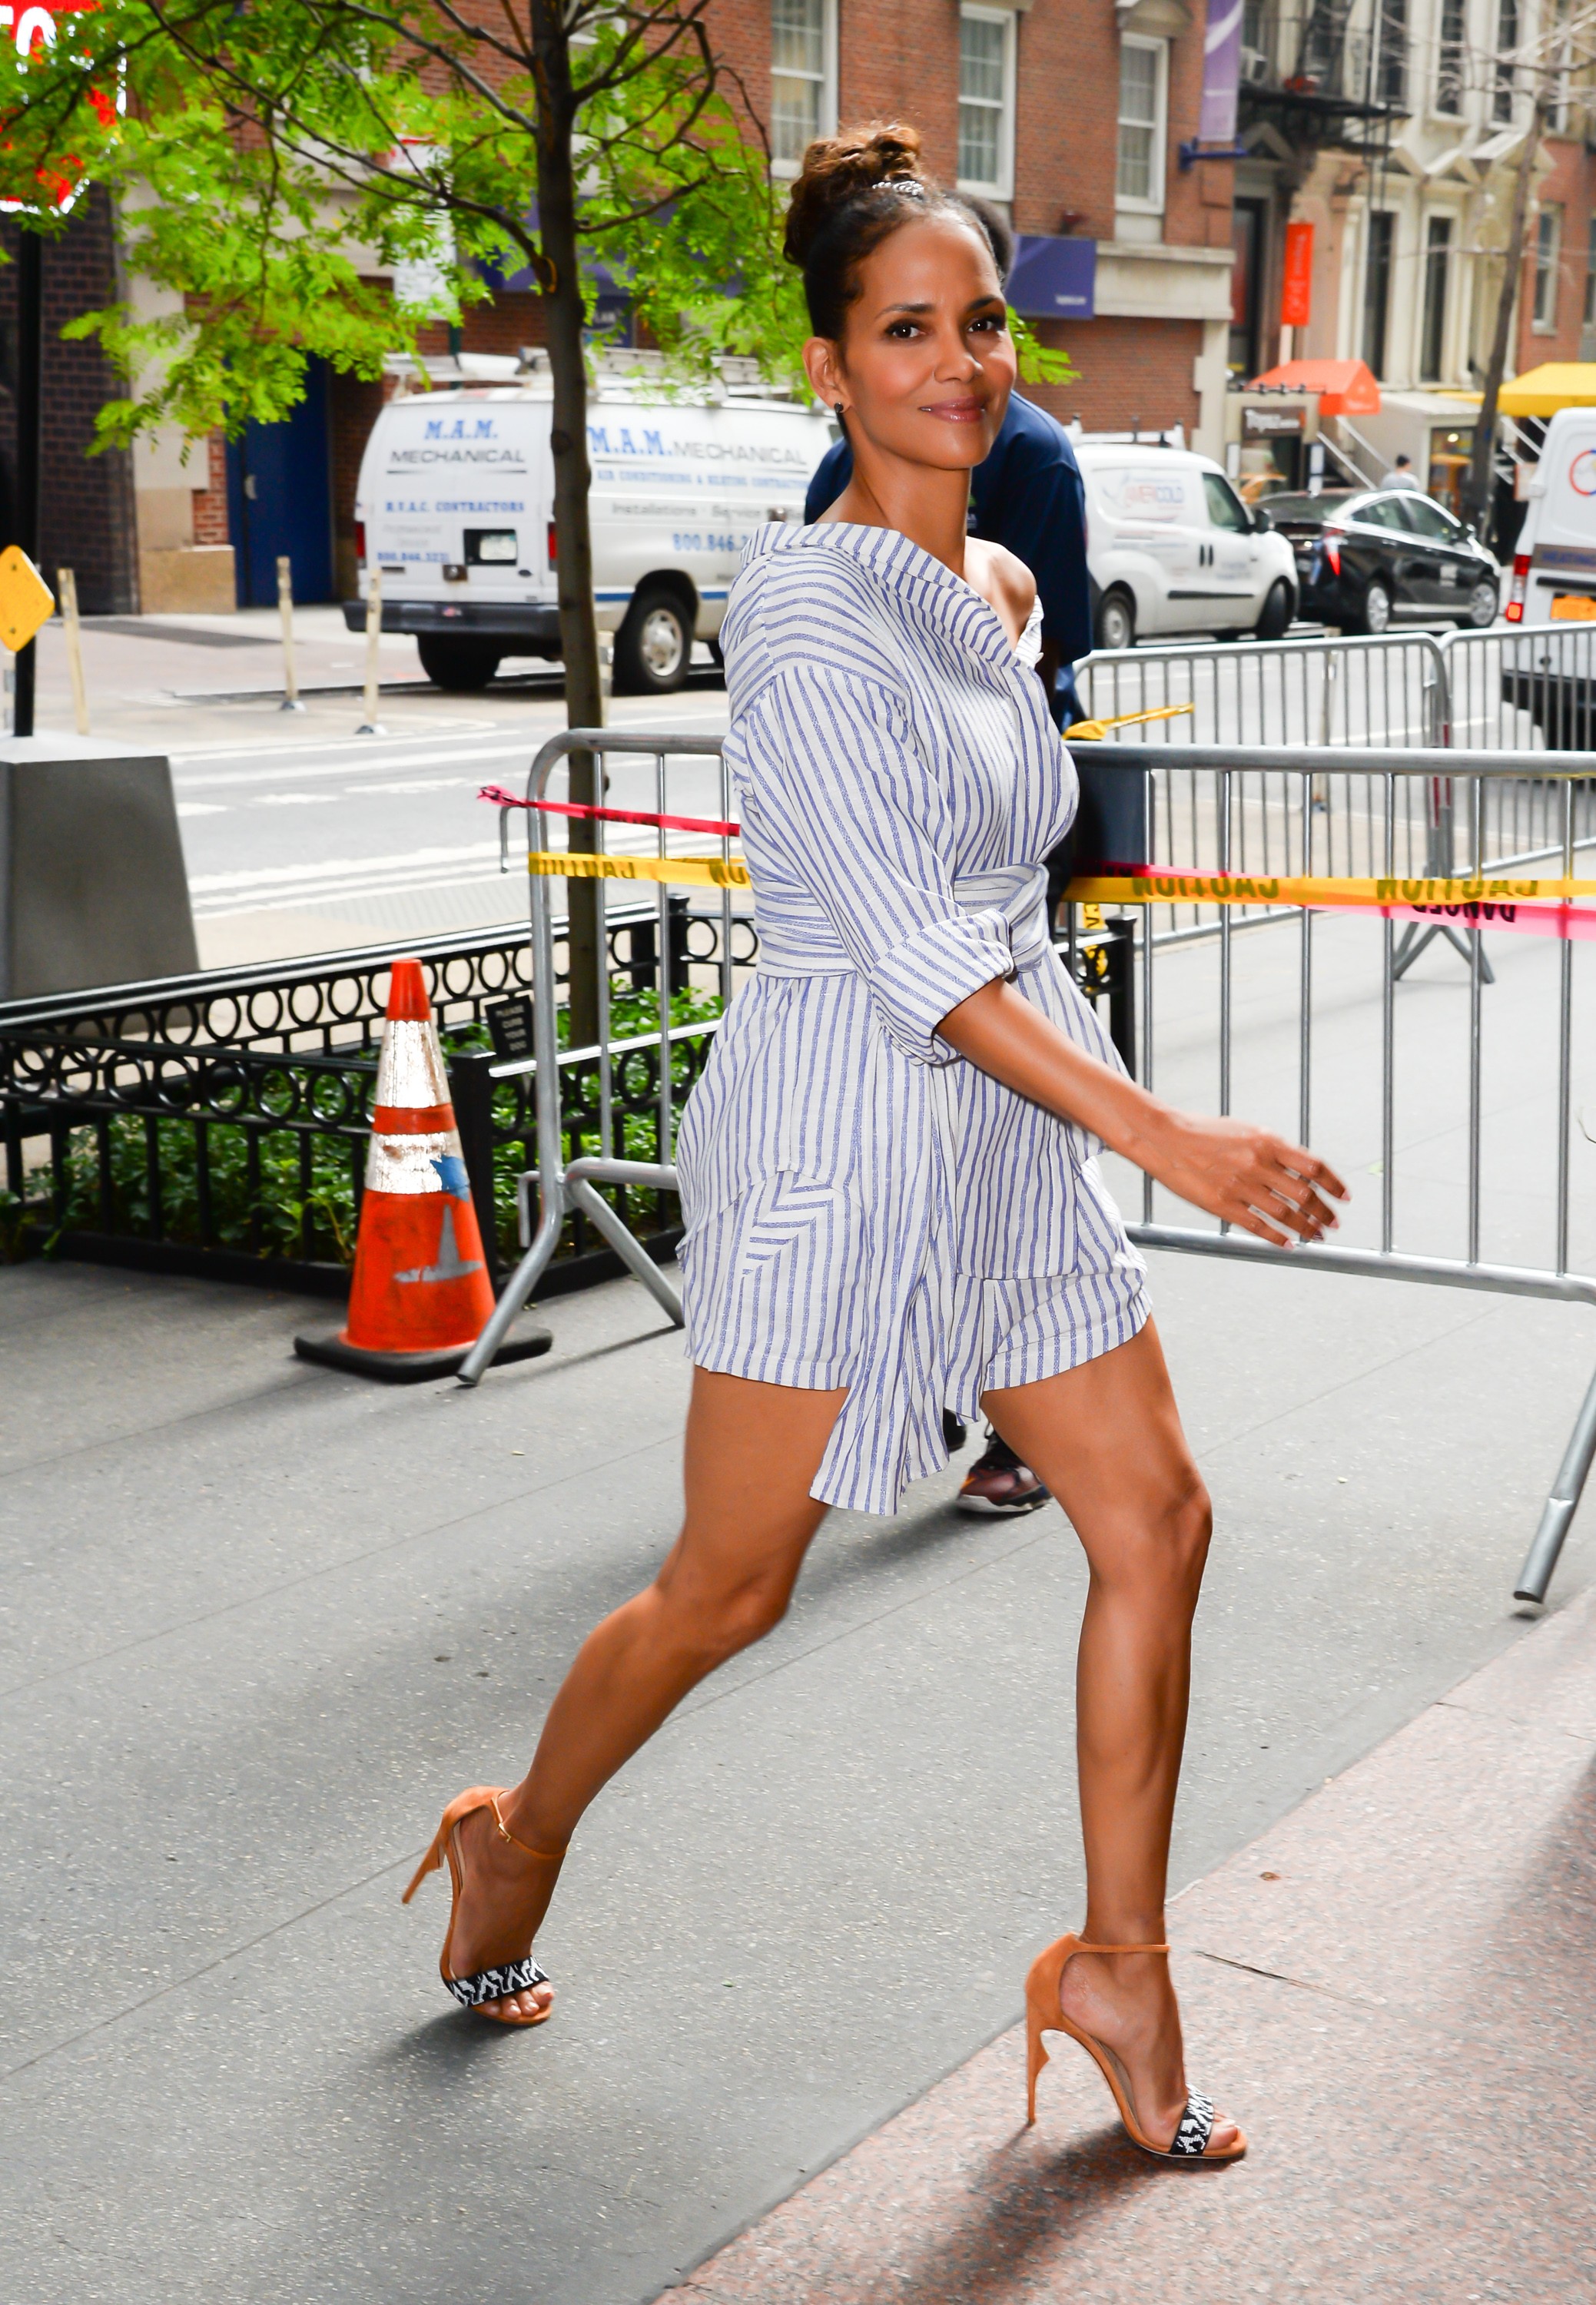 halle-berry-live-with-kelly-and-ryan-arrival-new-york-city-august-3rd-2017-20.jpg